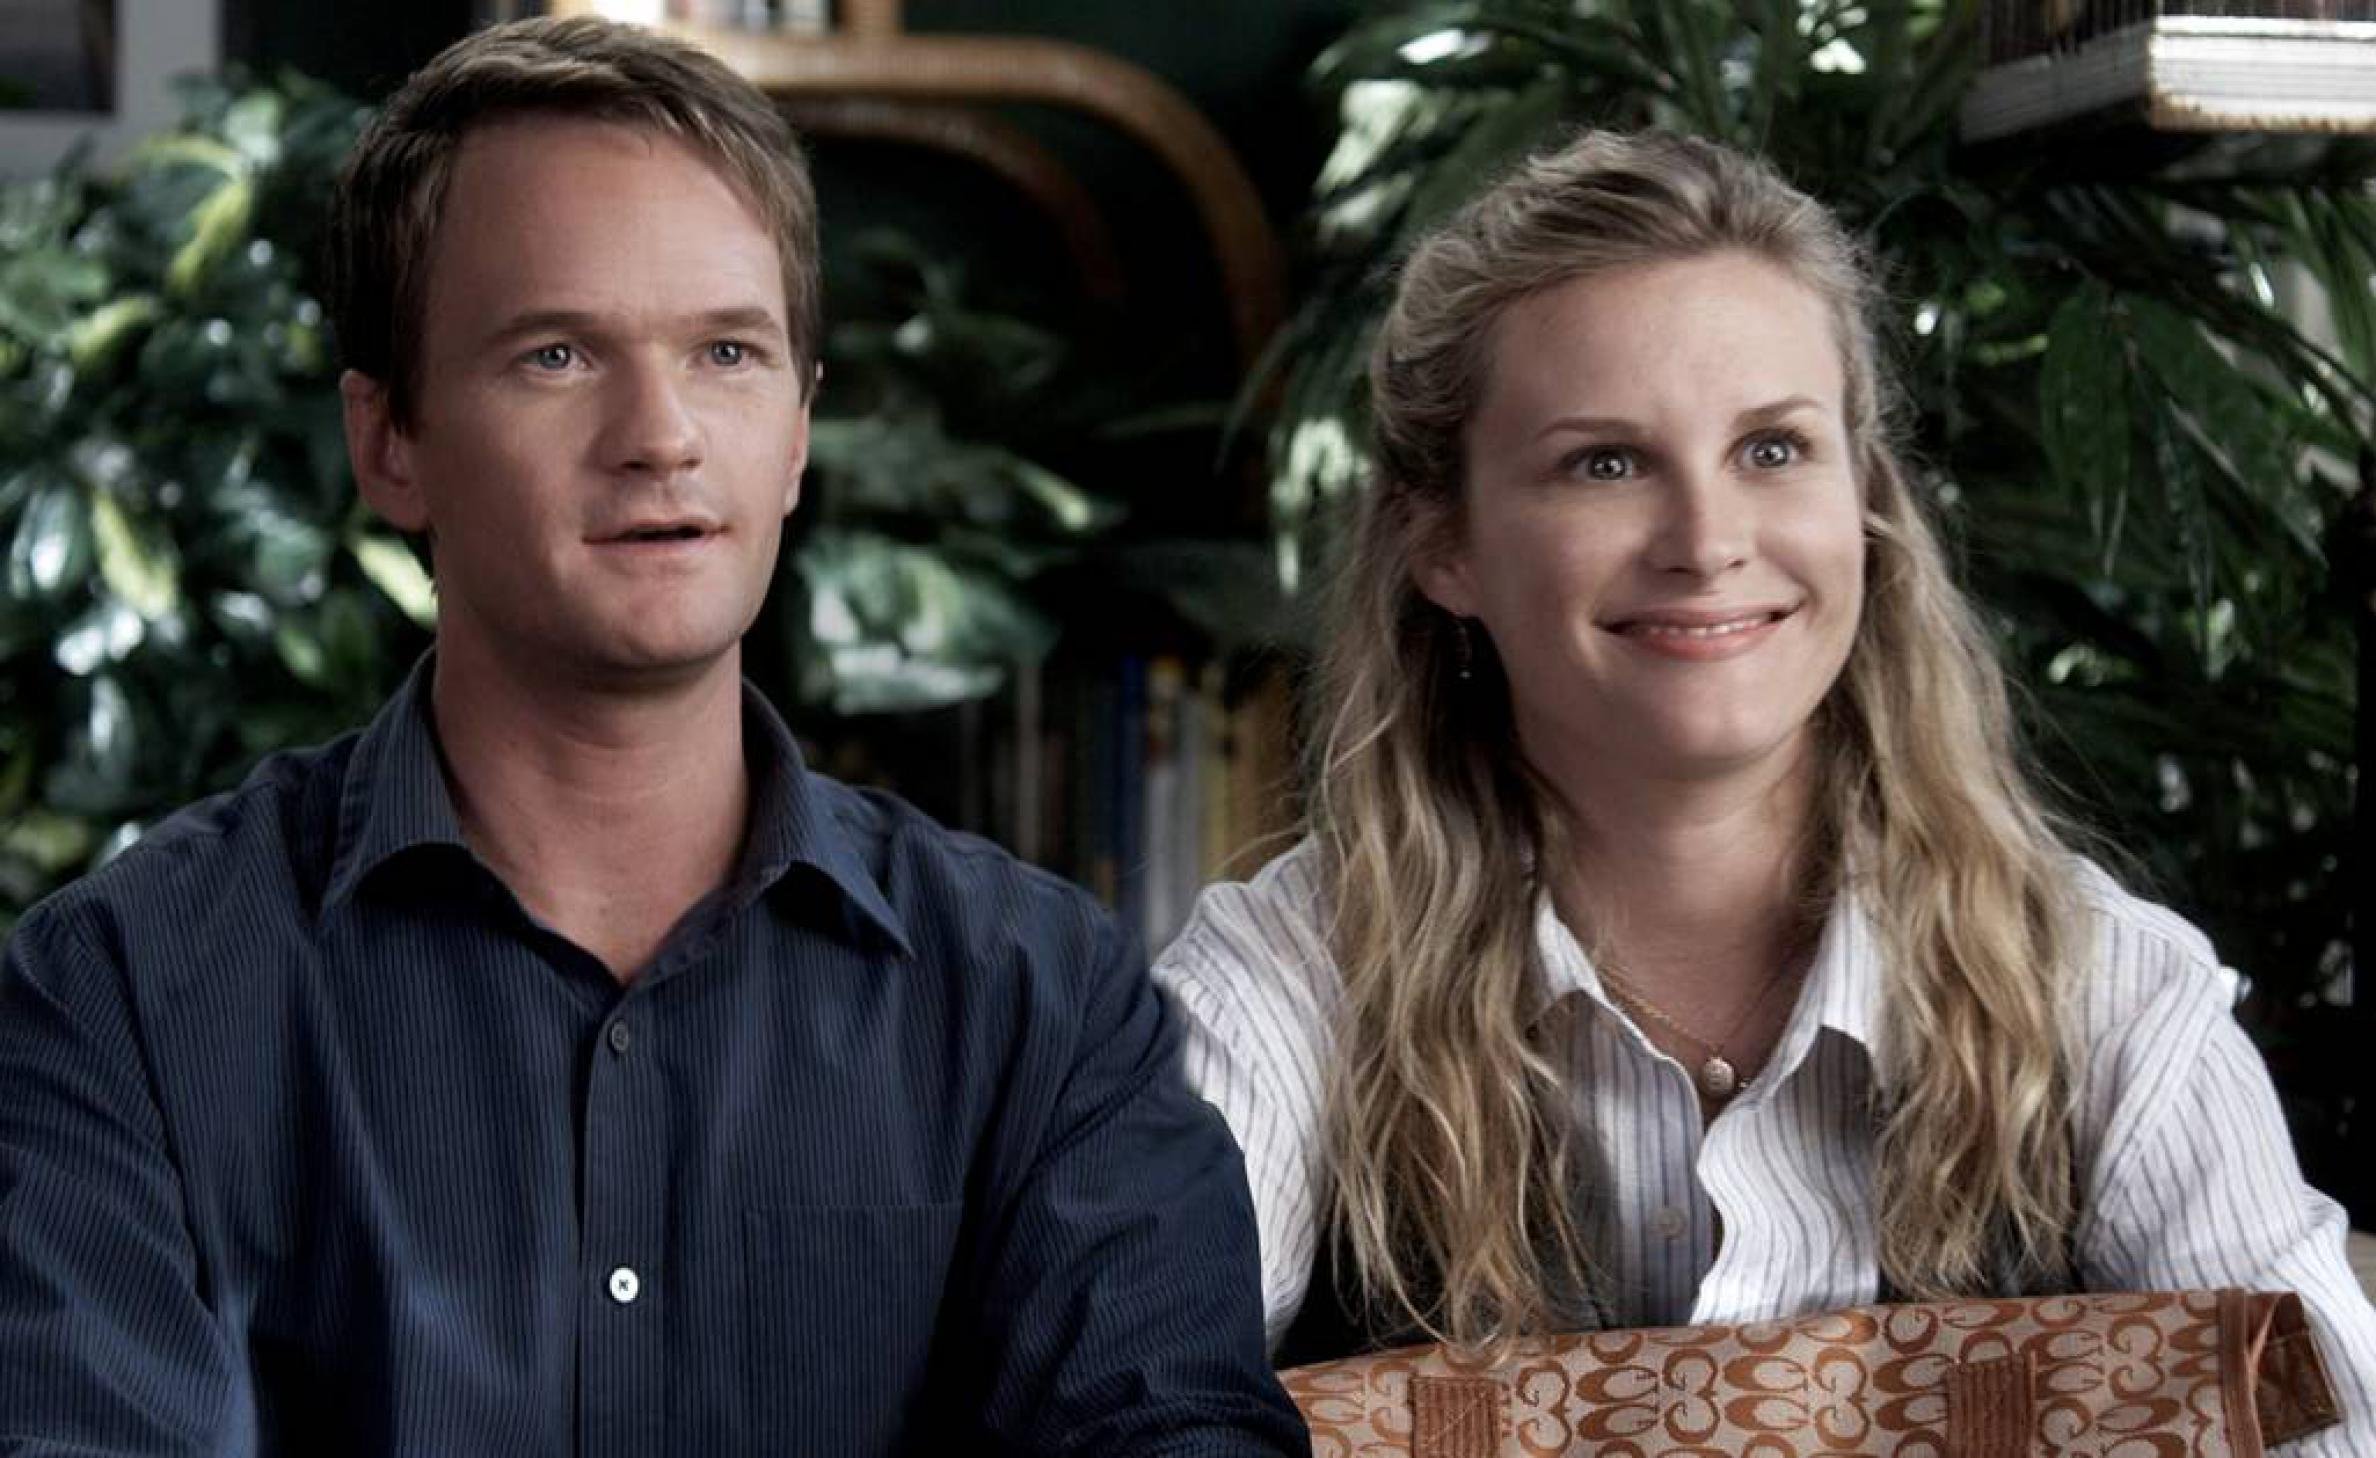 Neil Patrick Harris and Bonnie Somerville in The Best and the Brightest (2010)